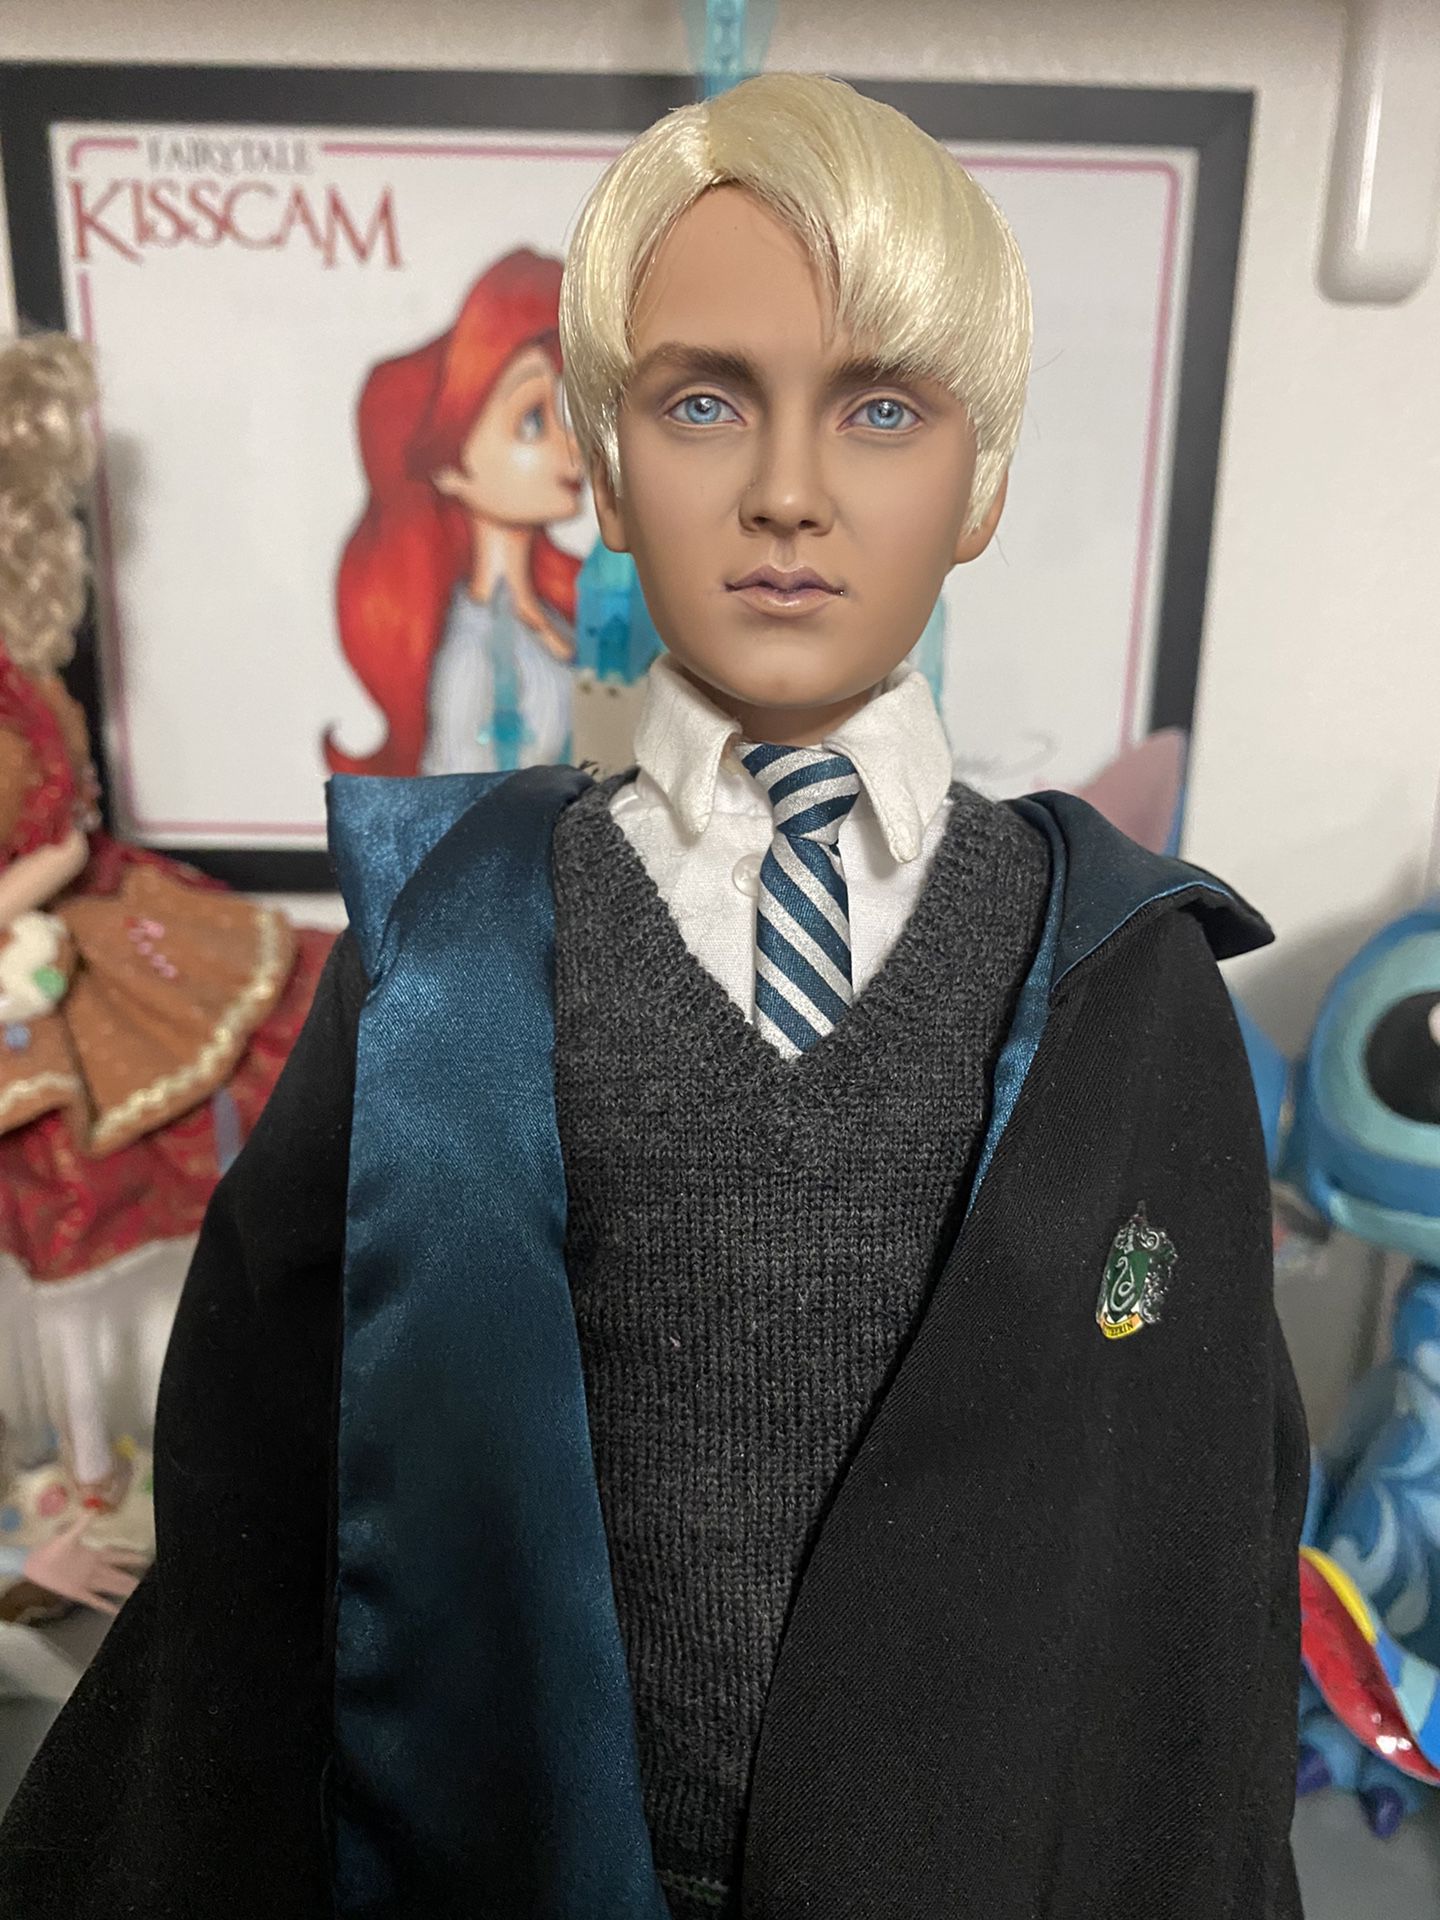 Harry Potter Draco Malfoy Ooak Tonner Doll One Of A Kind Repainted 